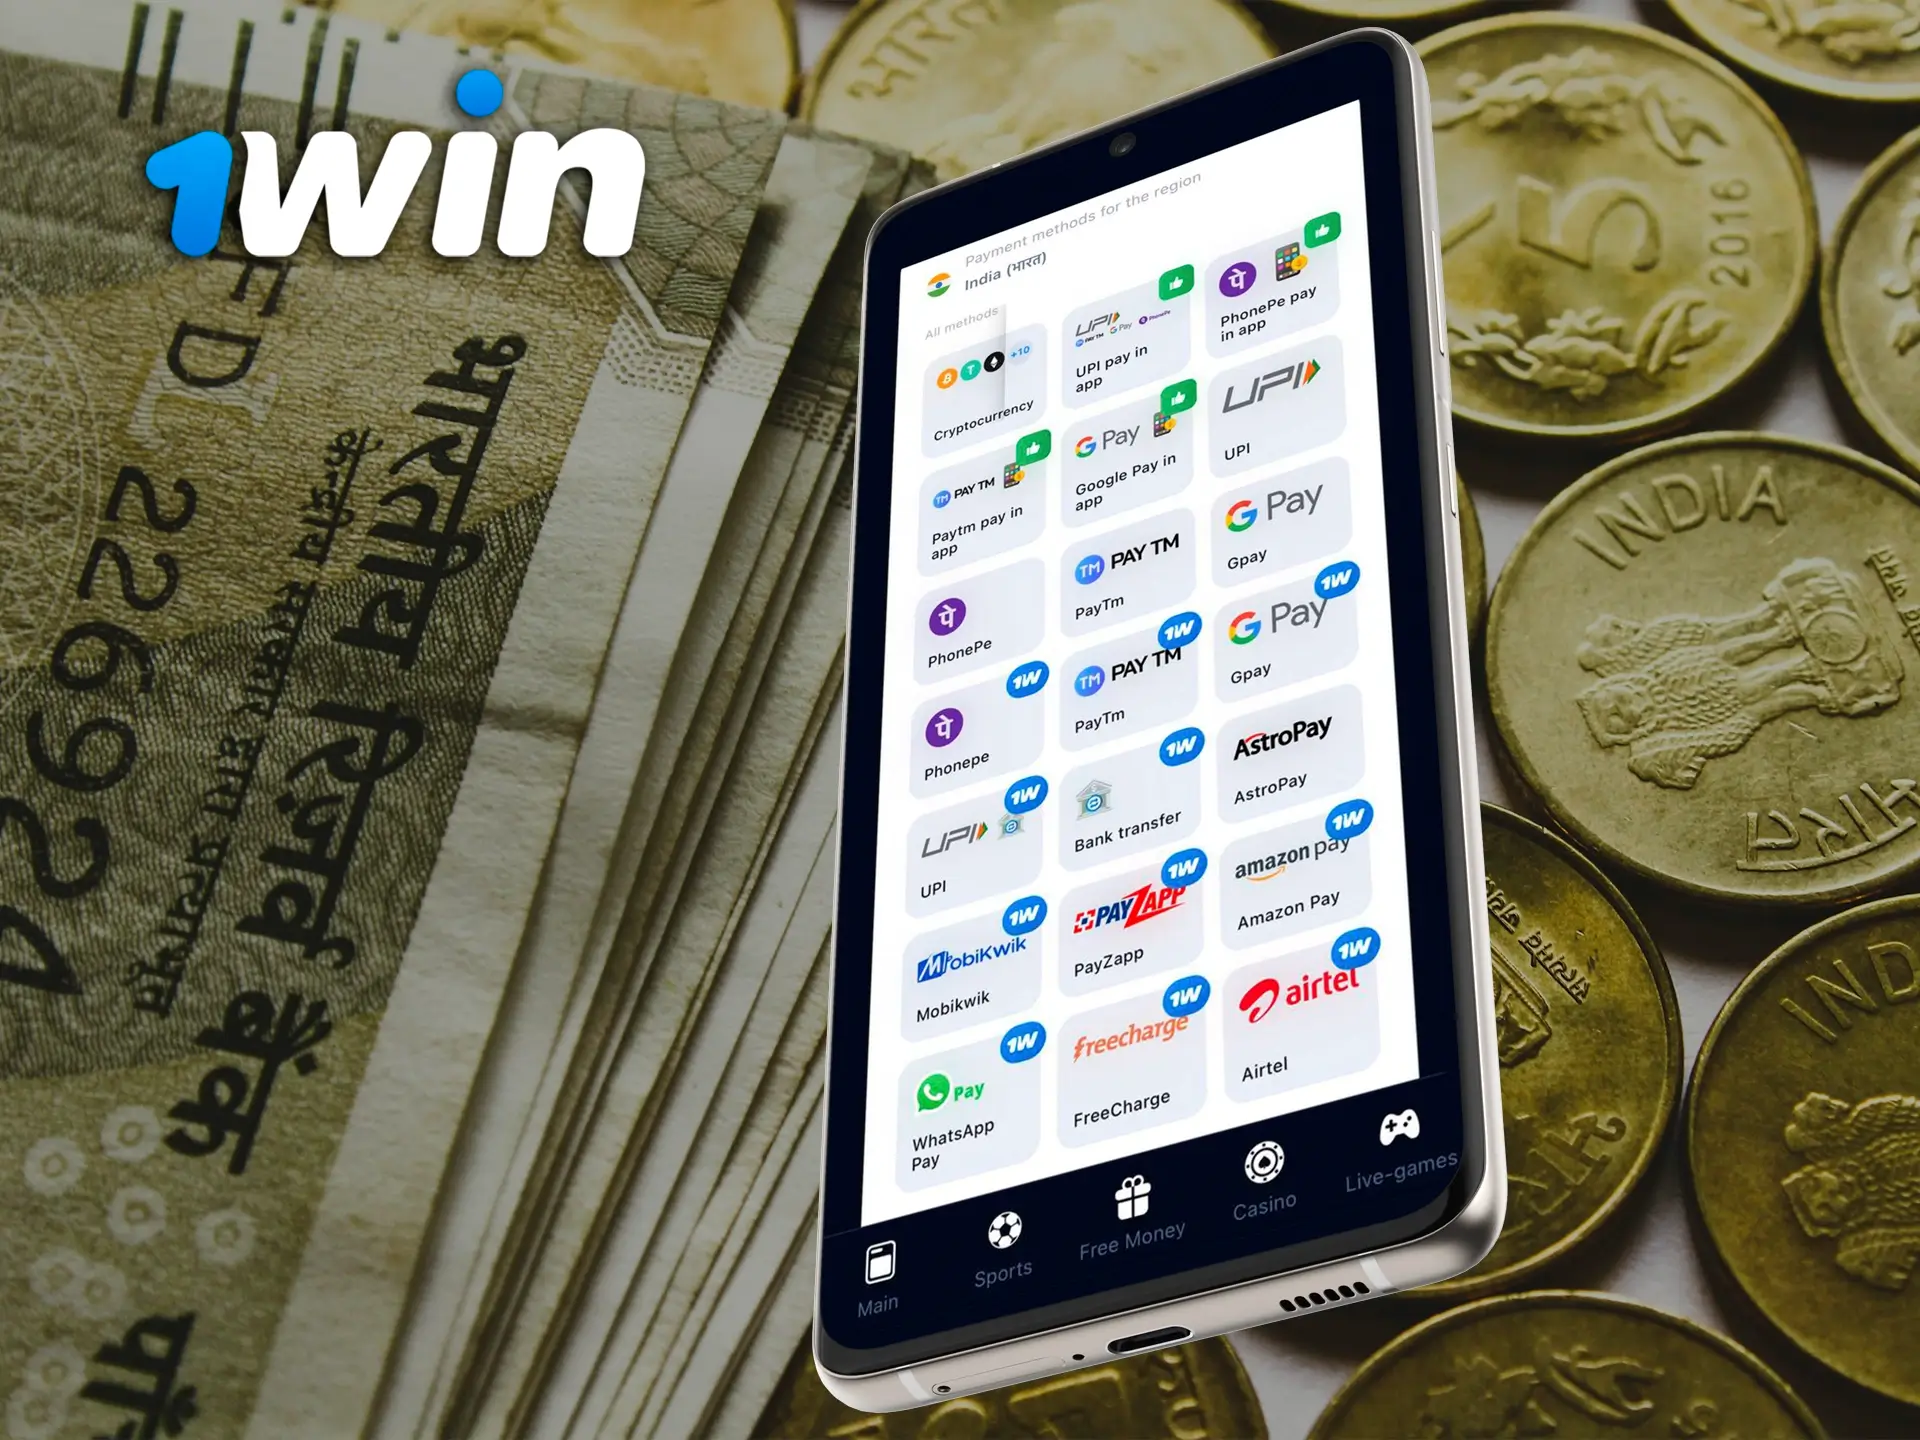 The big name and instant withdrawal from 1Win casino is familiar to every gambling enthusiast.